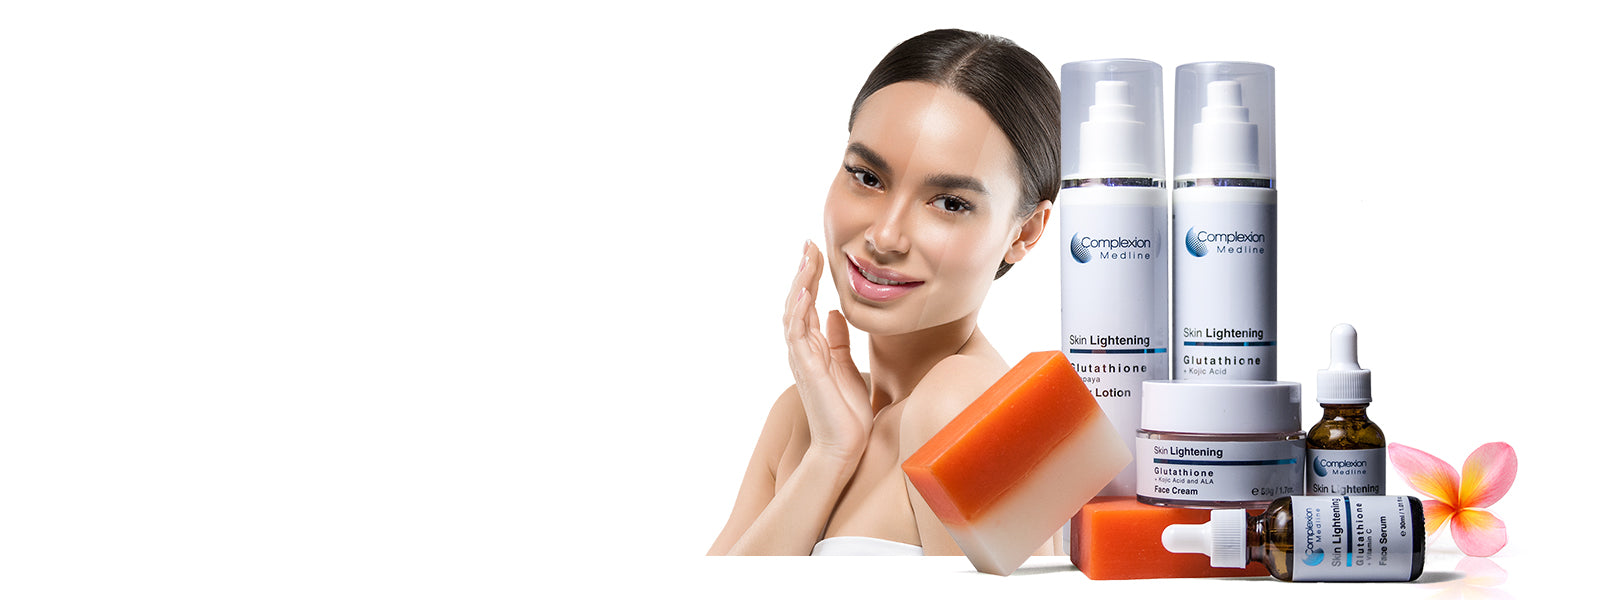 complexion medline skin lightening products and model, including glutathione body lotion, glutathione, kojic acid and ALA face cream, glutathion and vitamin c face serum, skin lightening soap for delicate skin